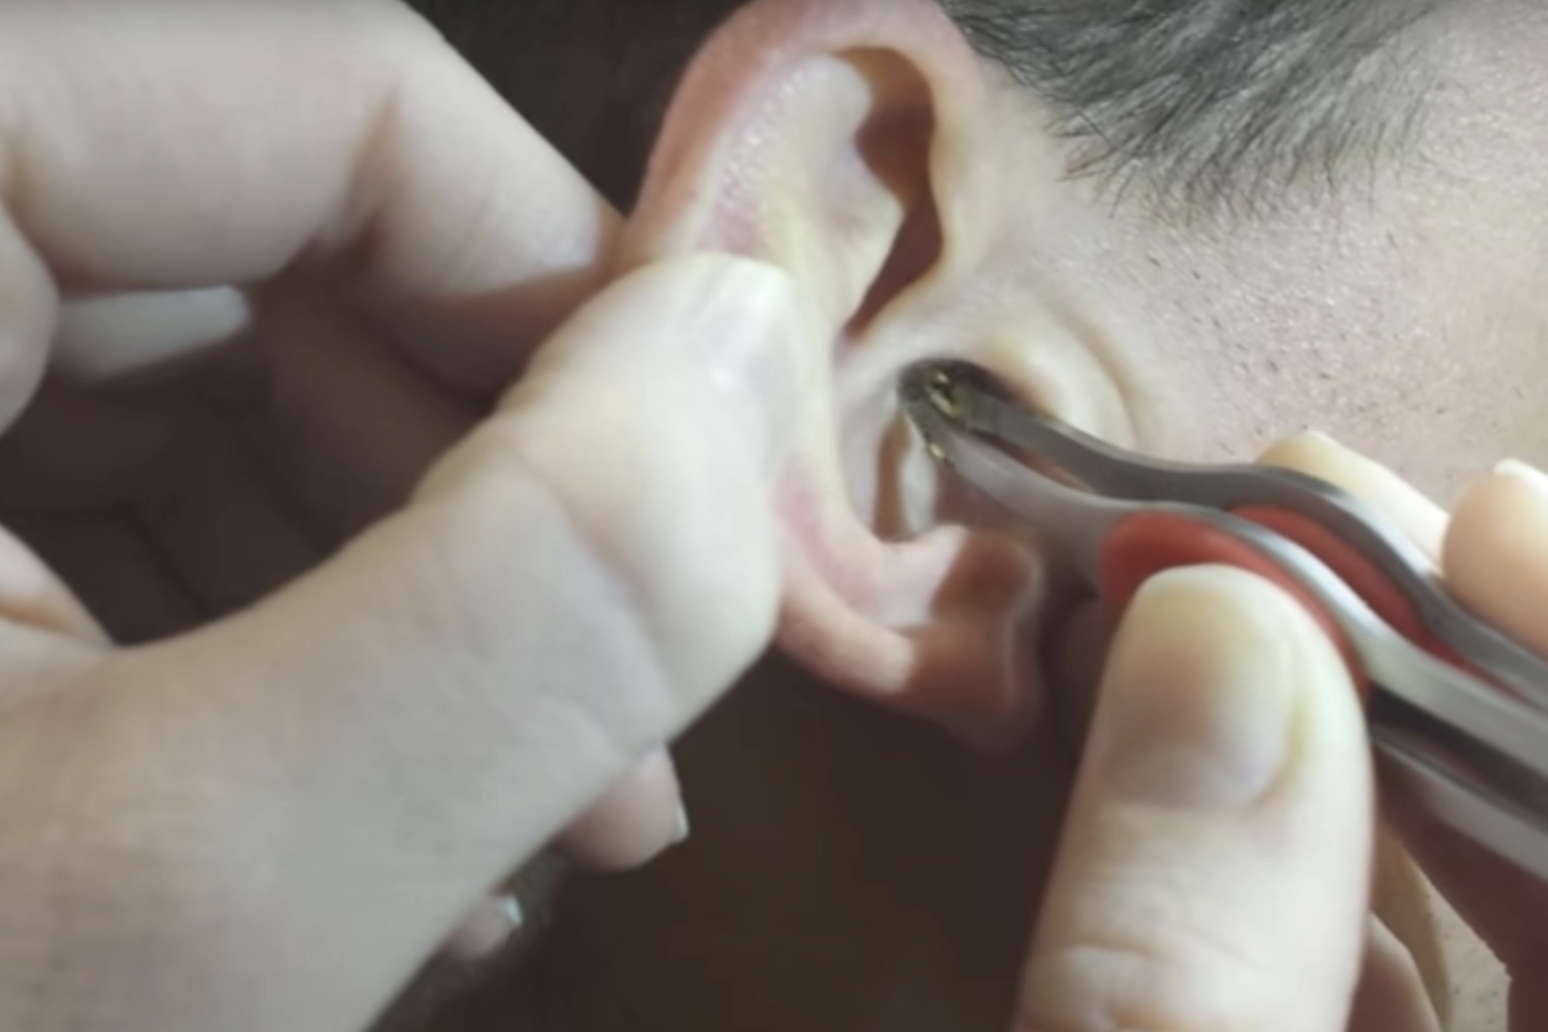 Man Has Gross Amount of Ear Wax Removed from Ear Canal